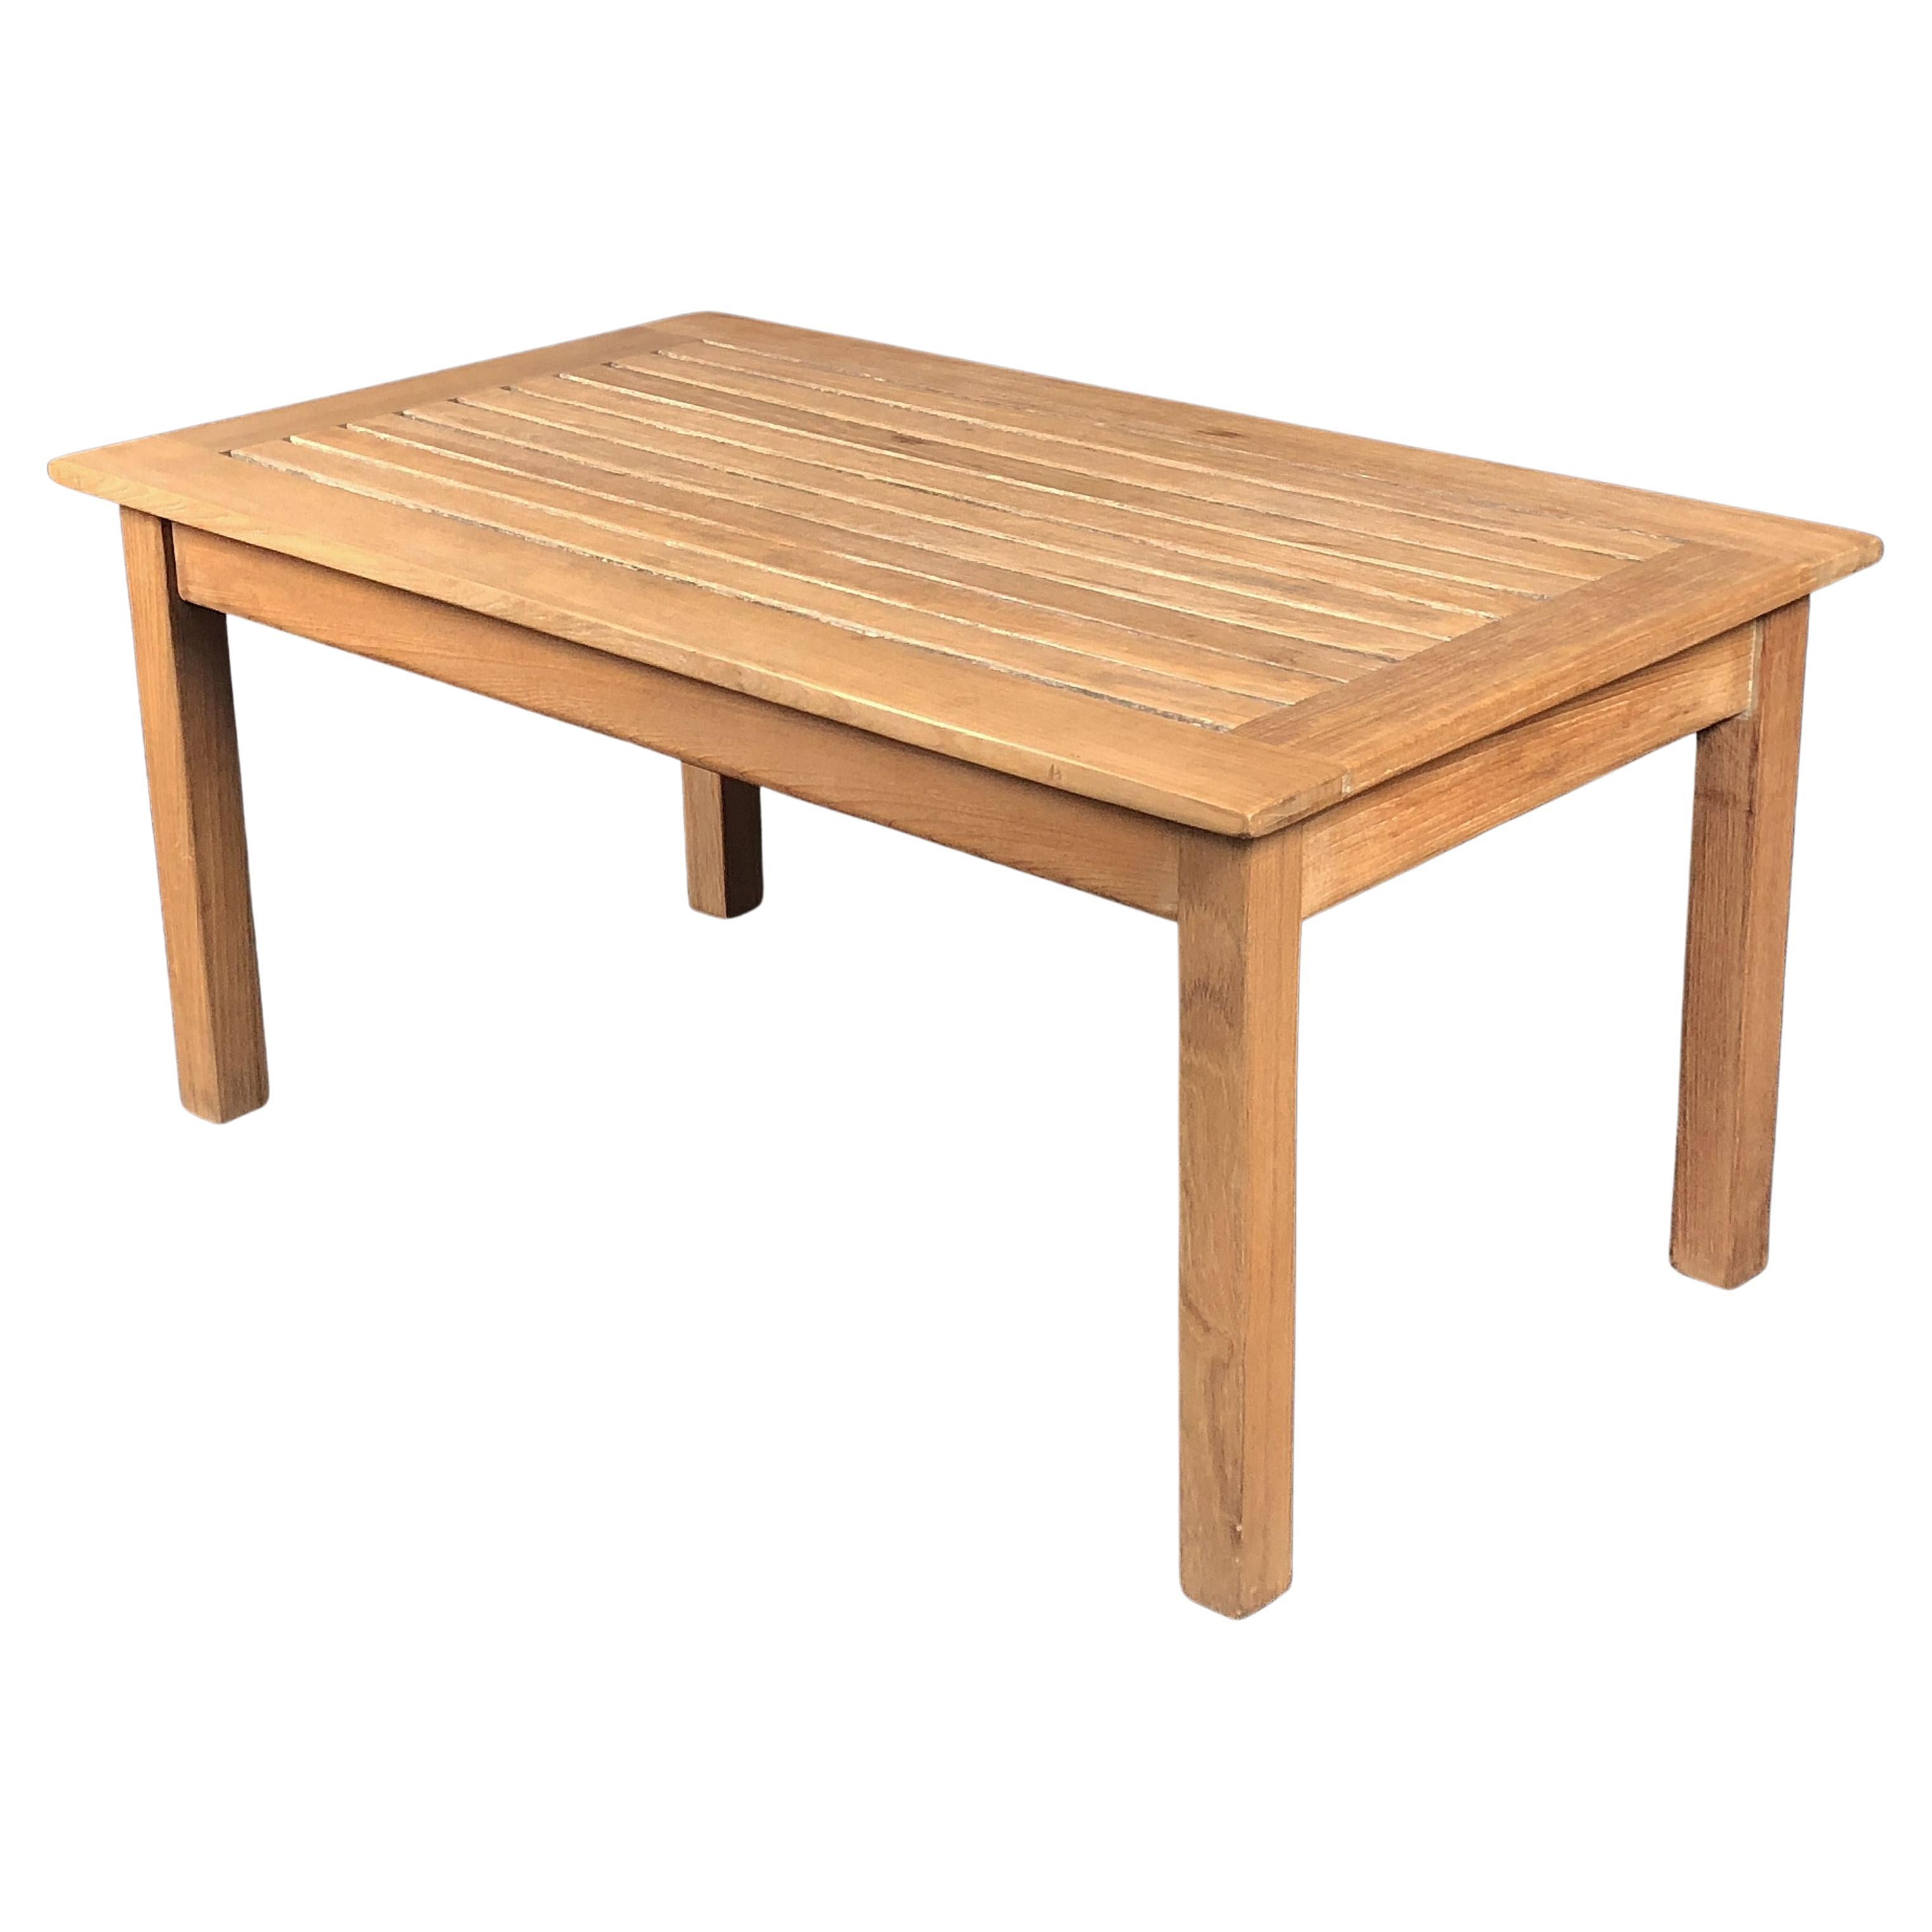 English Rectangular Low Table of Teak for the Garden or Patio